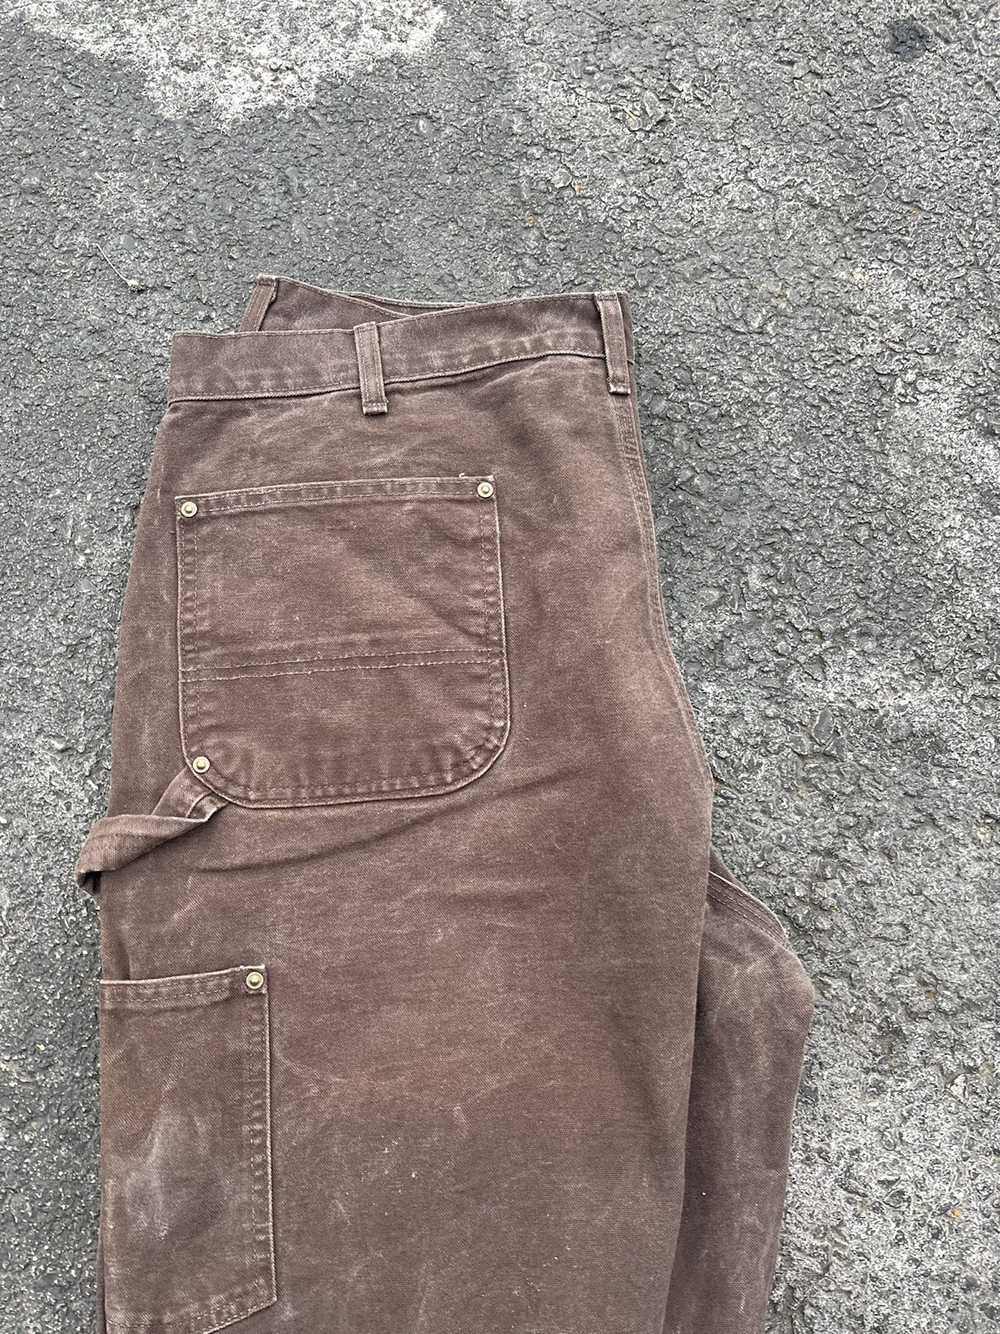 Carhartt Vintage Brown faded distressed Double Kn… - image 3